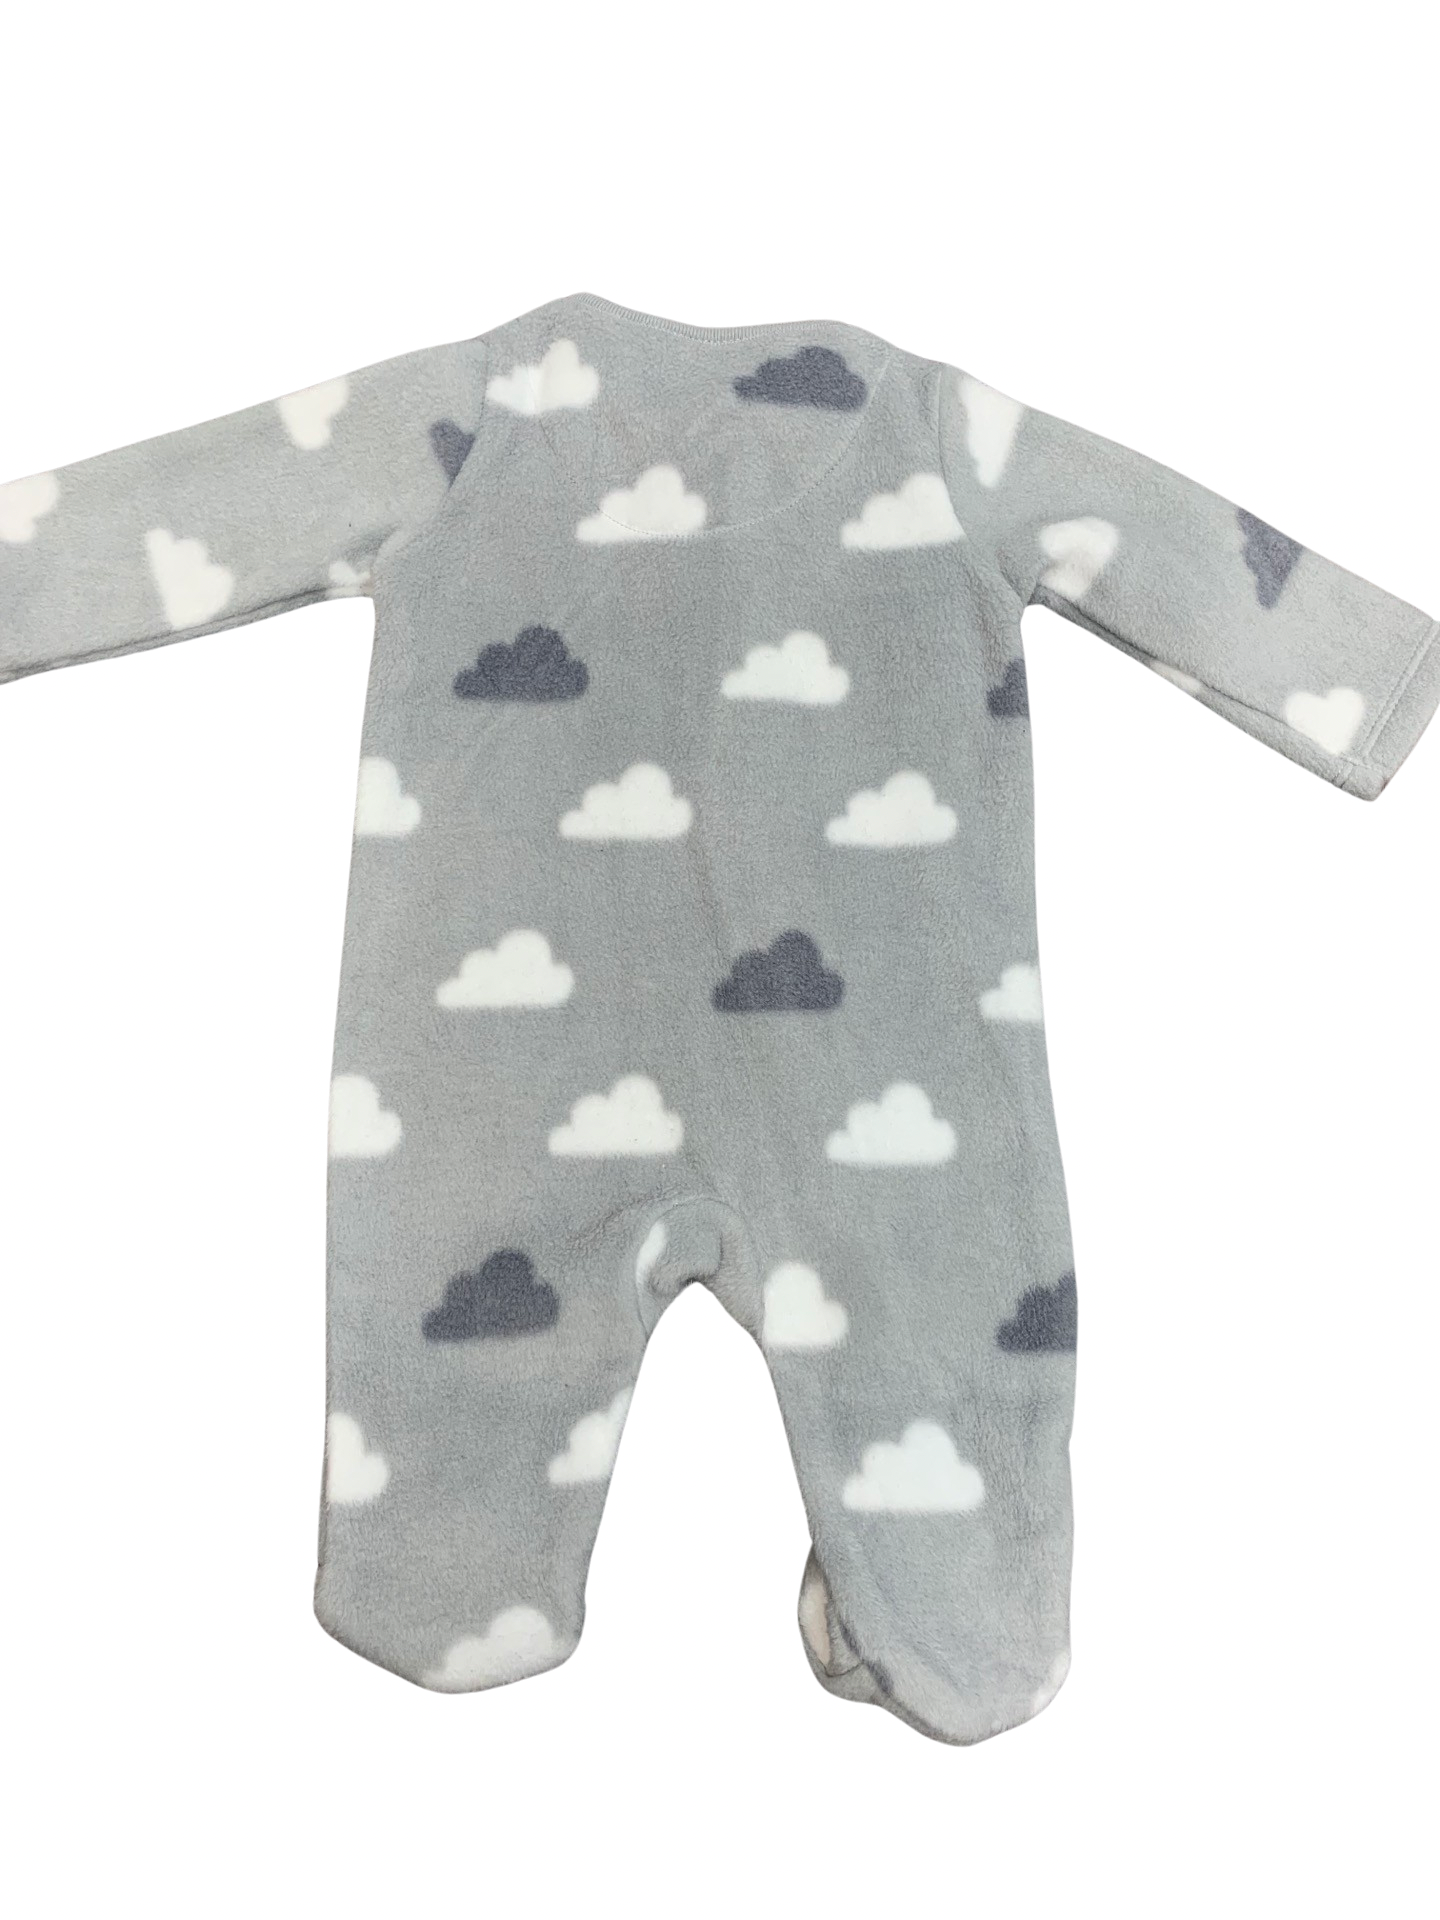 F&F Cloud Patterned Fleece Sleepsuit Up To 1 Month/10lbs